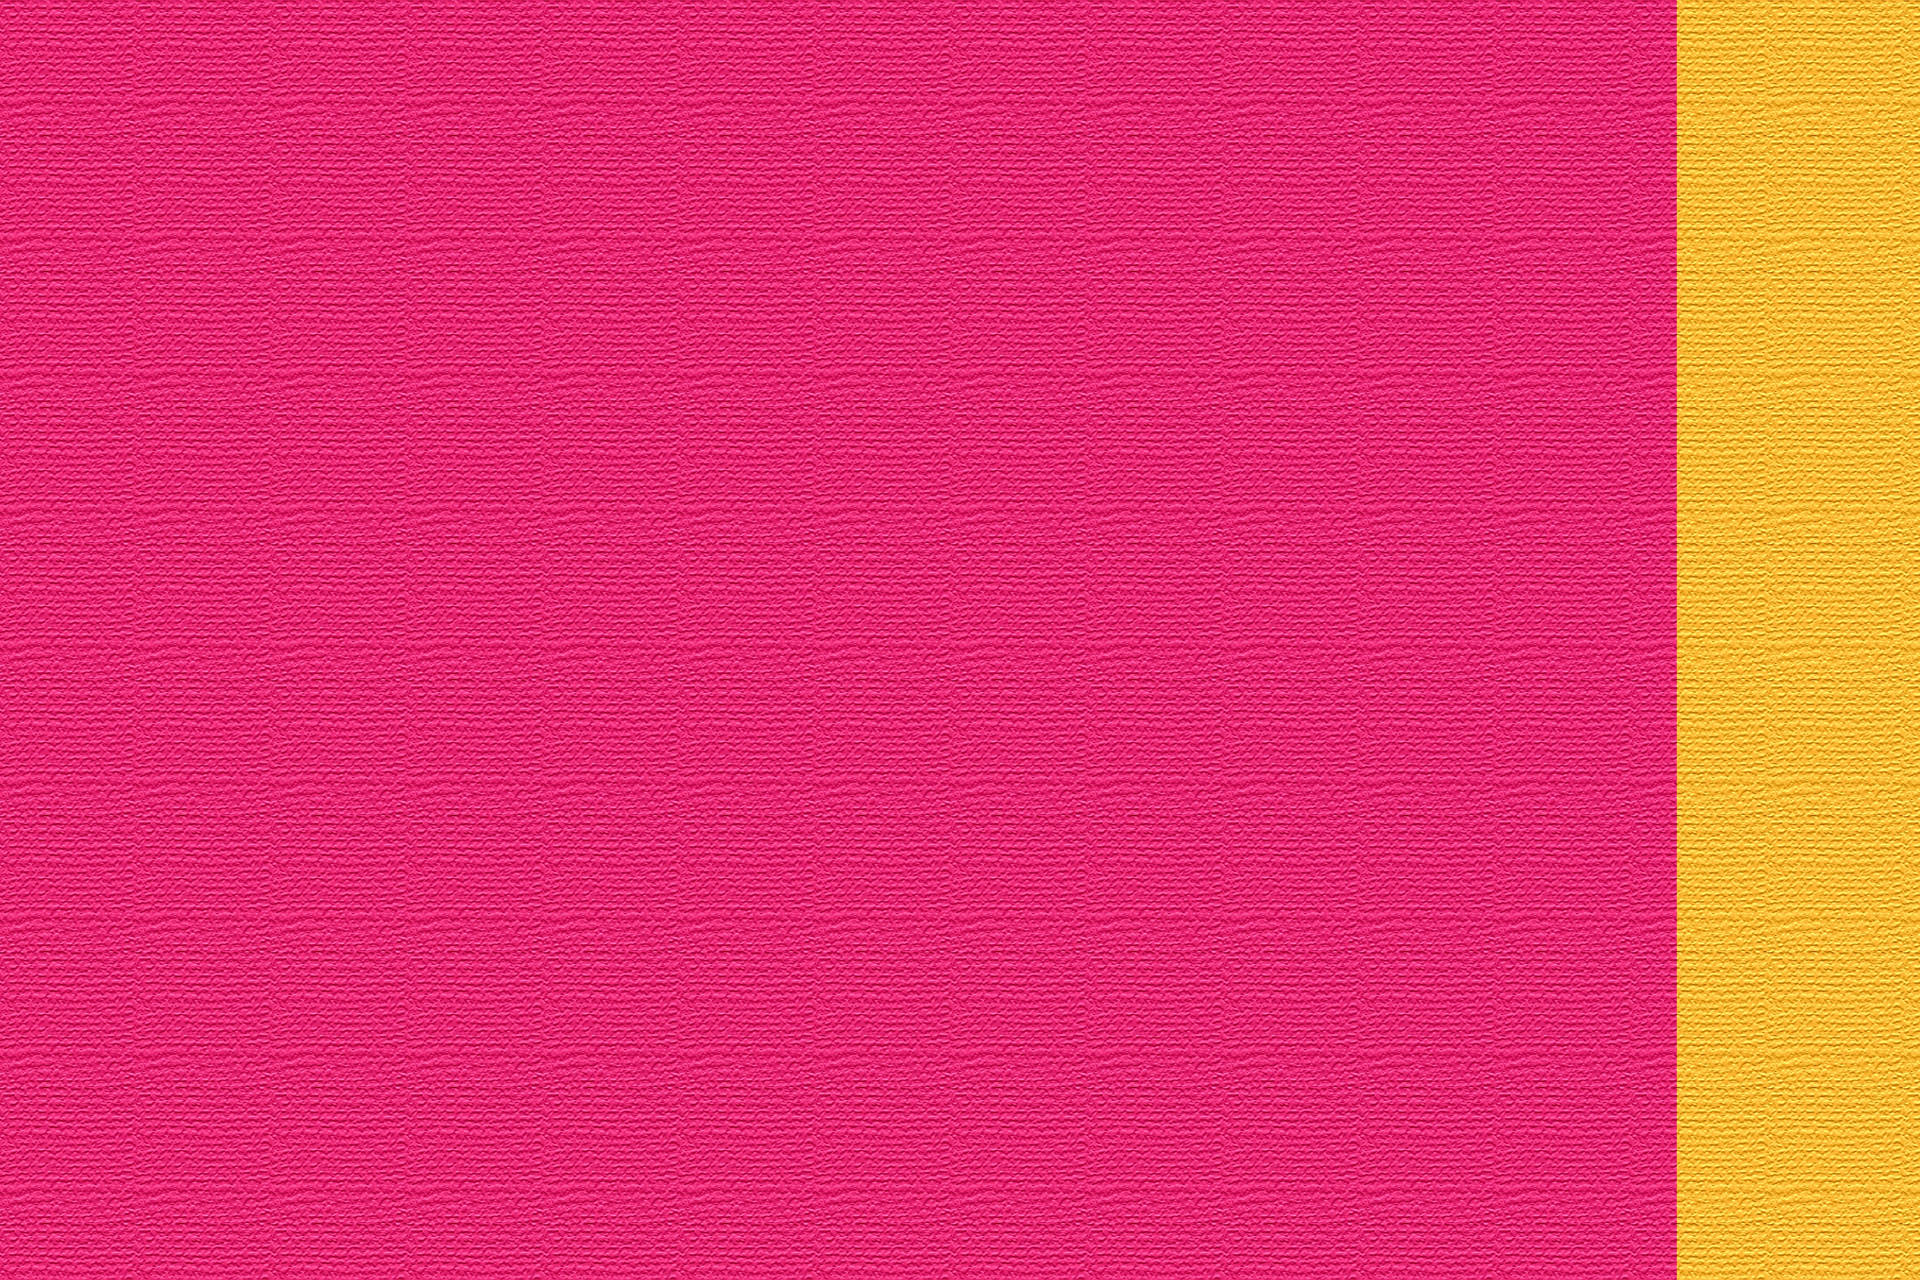 Blank Pink And Yellow Background